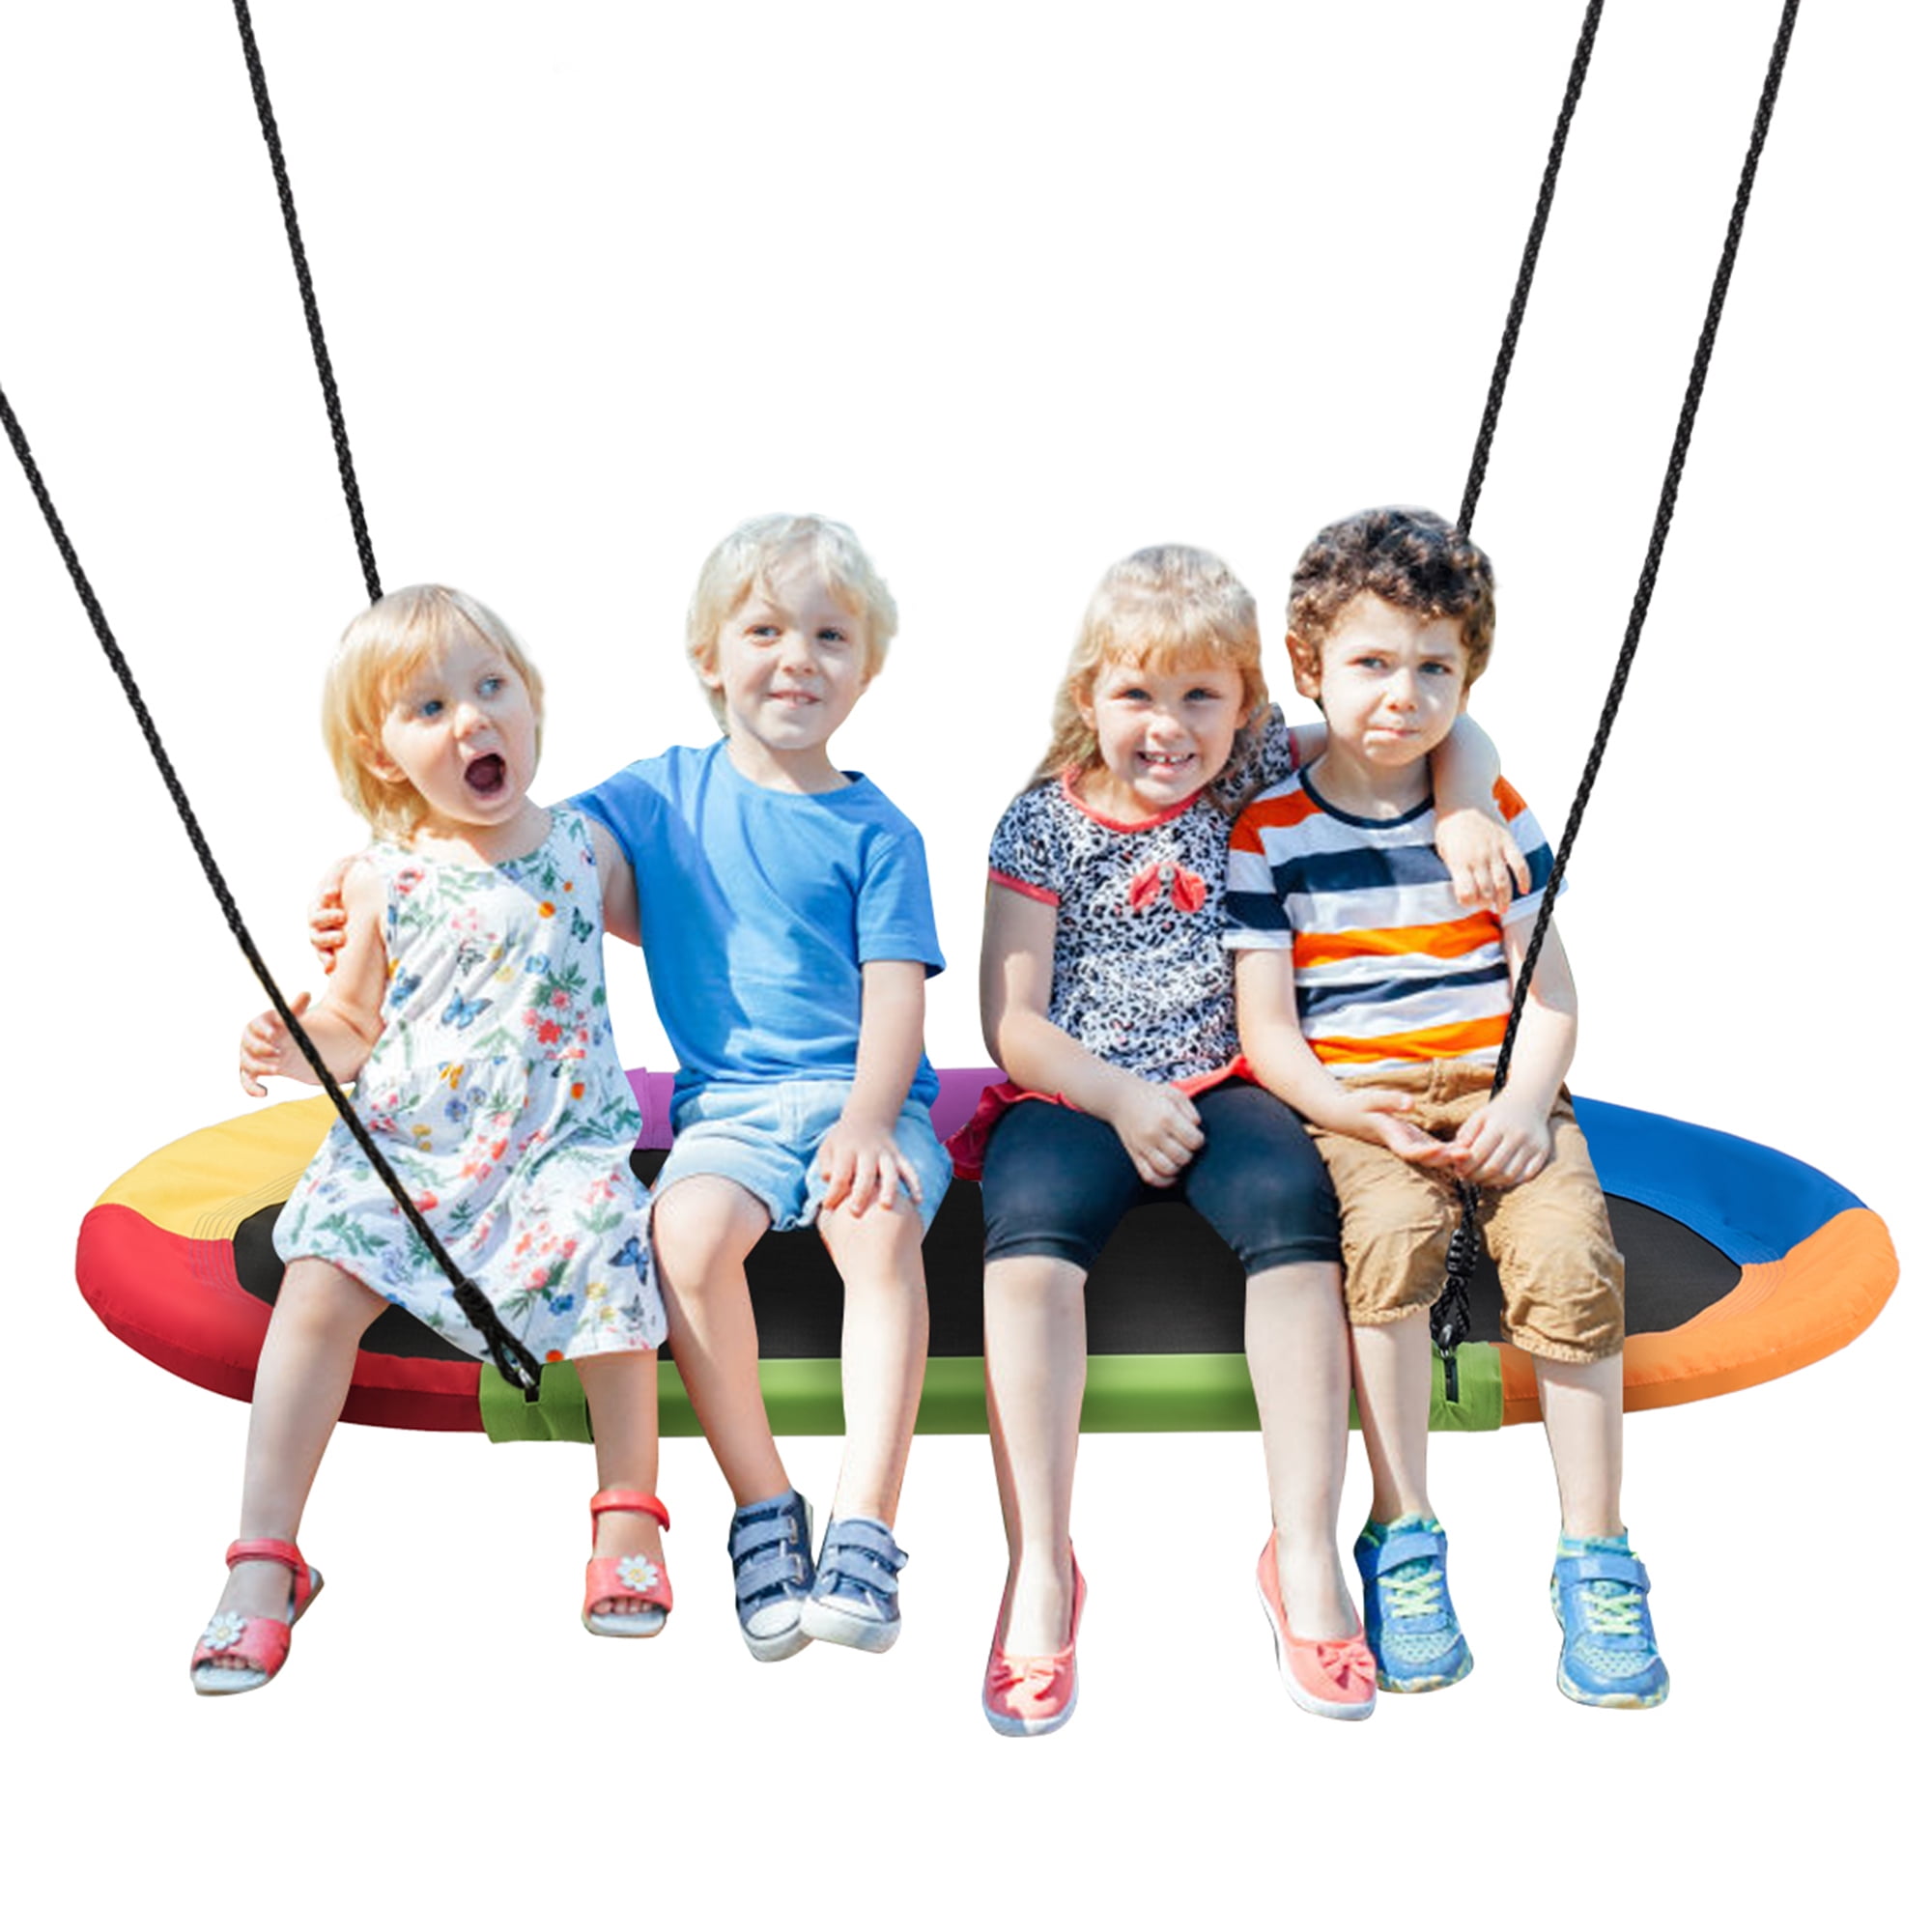 Details about   40" Child Kids Outdoor Saucer Tree Swing EZ Assembled Platform 700lbs Max Rope 